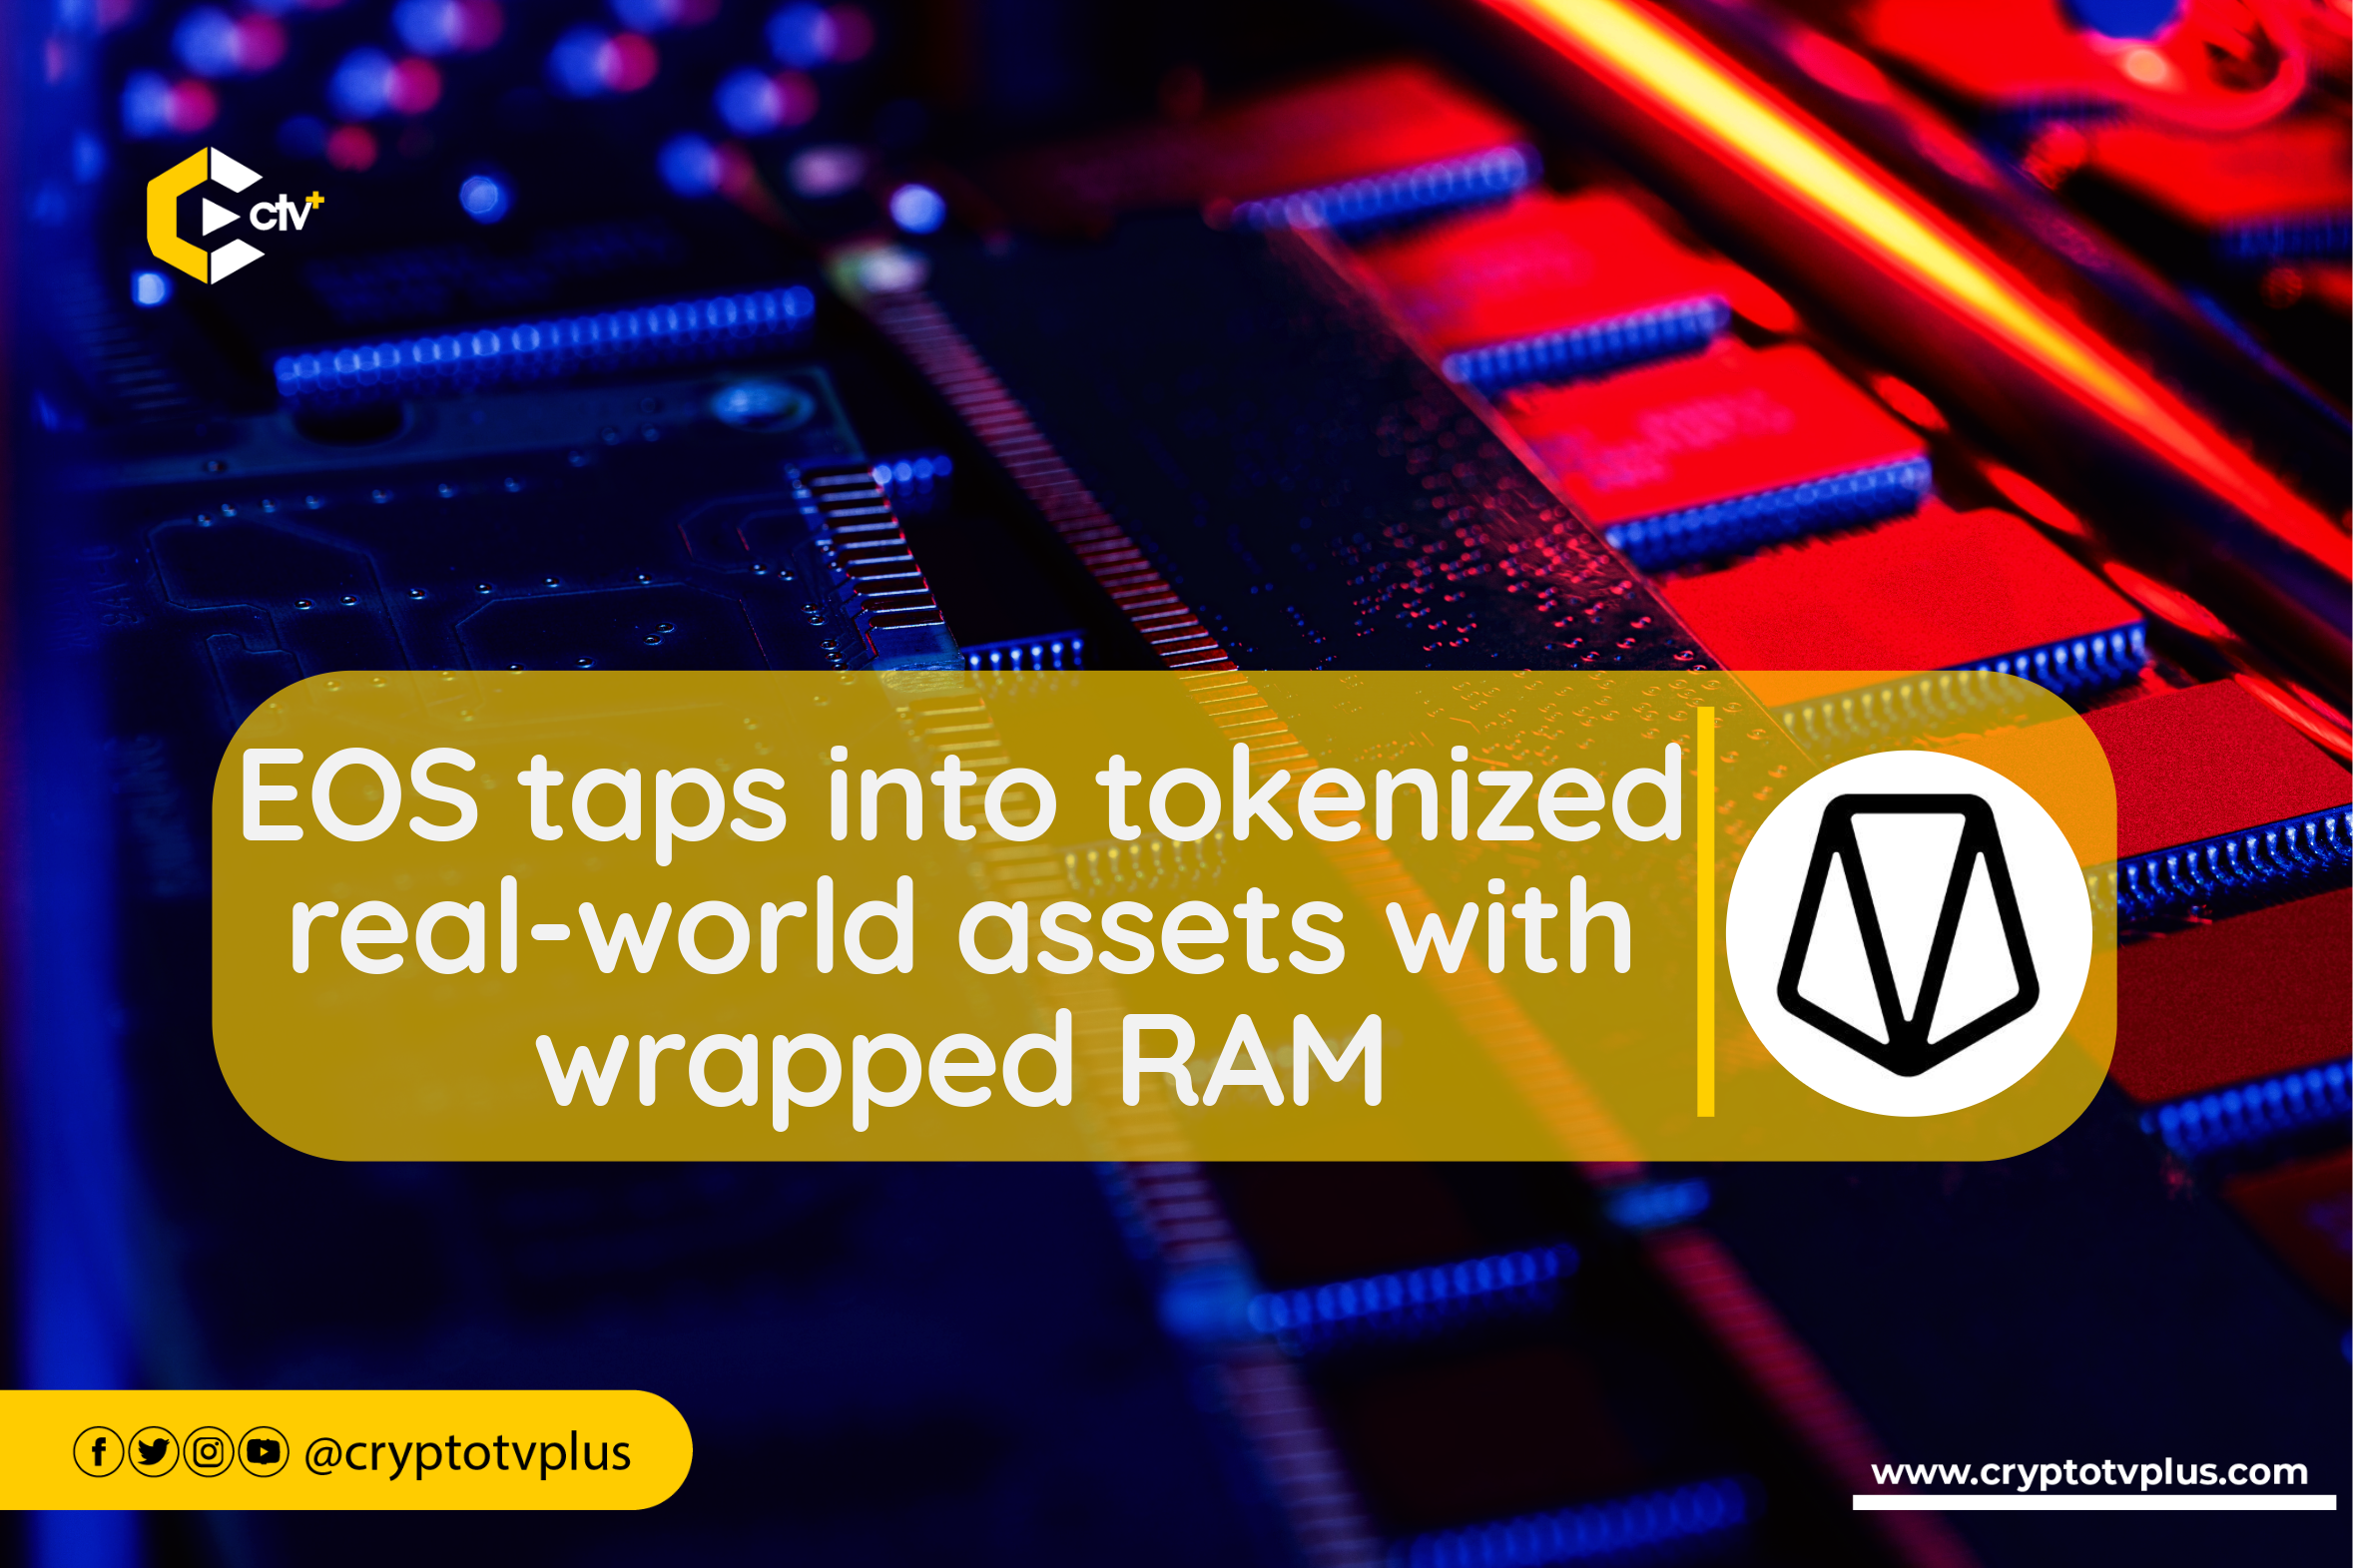 EOS introduces Wrapped RAM (WRAM), a concept that tokenizes real-world assets, making them tradable on exchanges & increasing accessibility & liquidity.